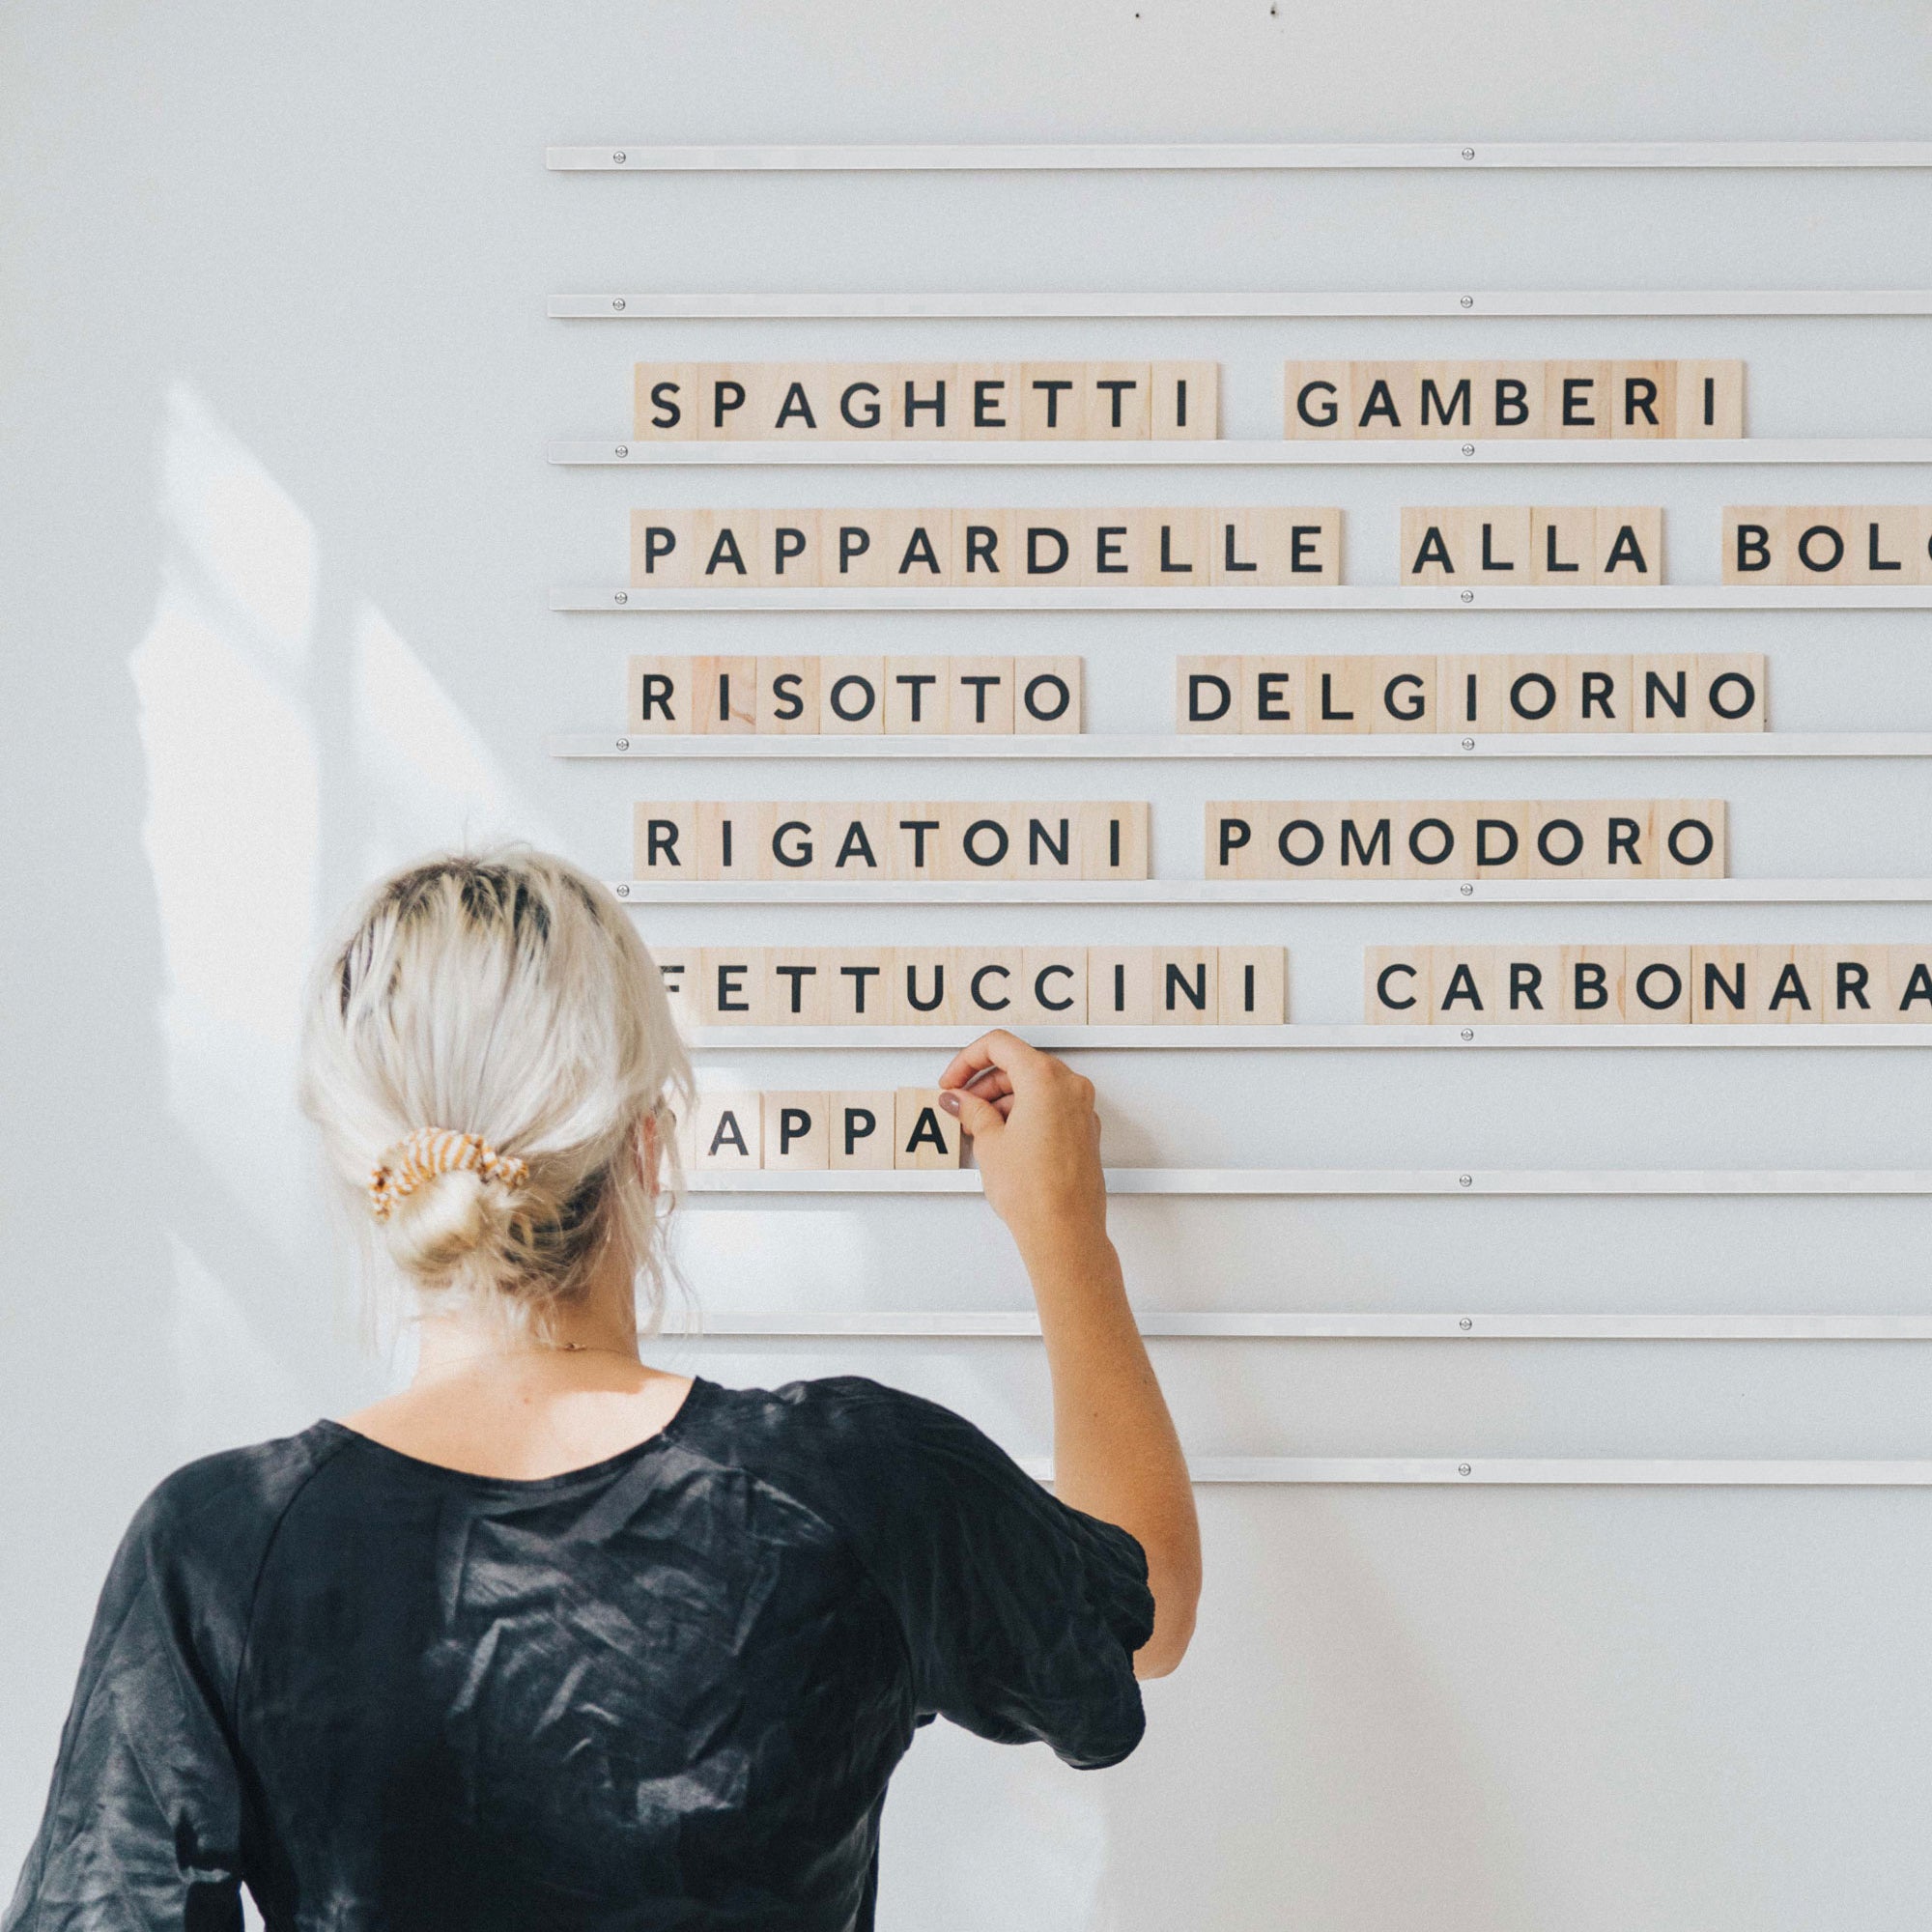 A girl adding wooden letter tiles to wall-mounted rails to display a pasta menu on a white wall